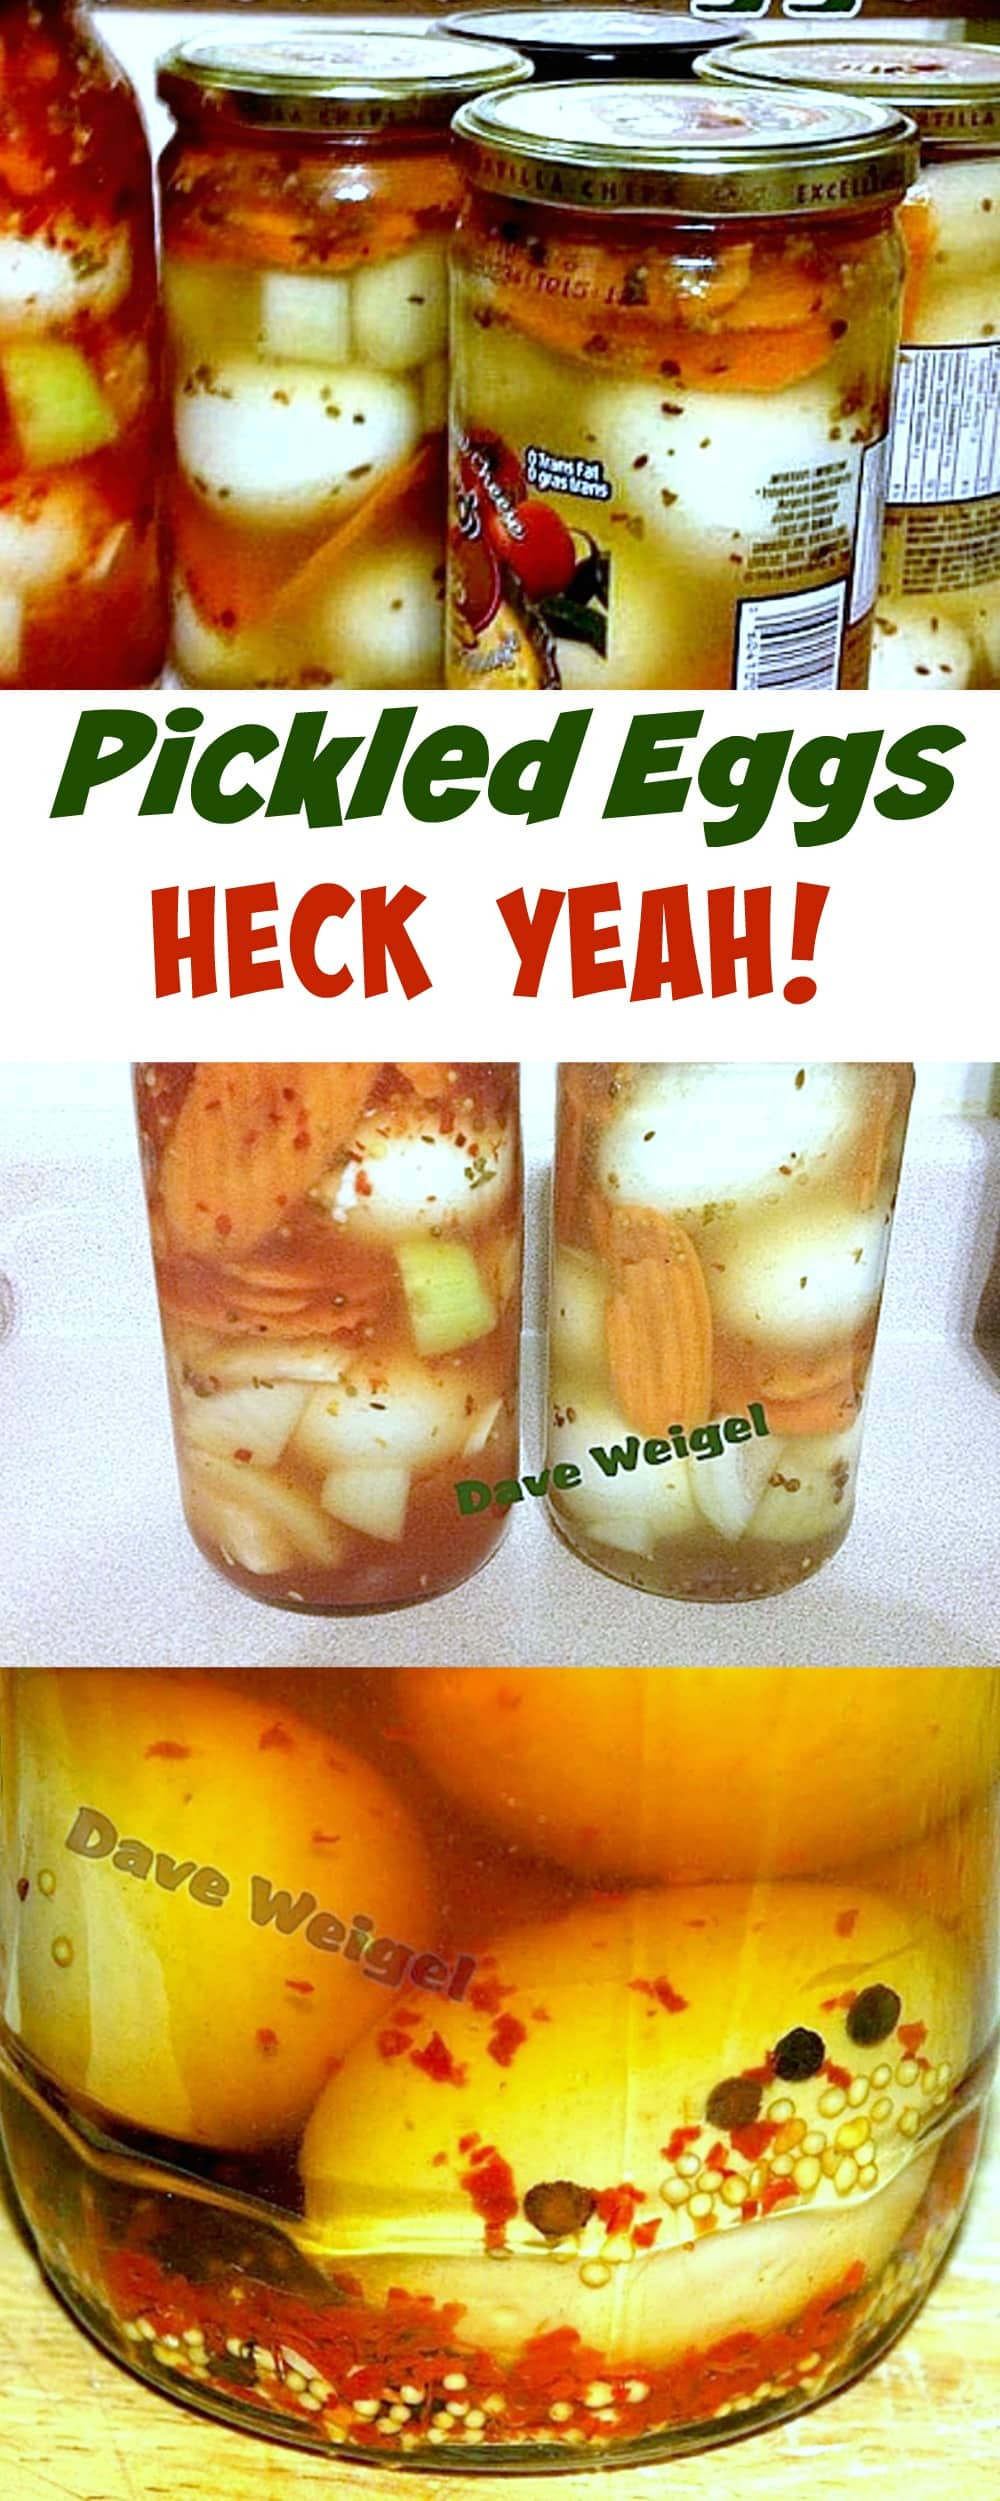 Recipe For Pickled Eggs
 Pickled Eggs Heck Yeah